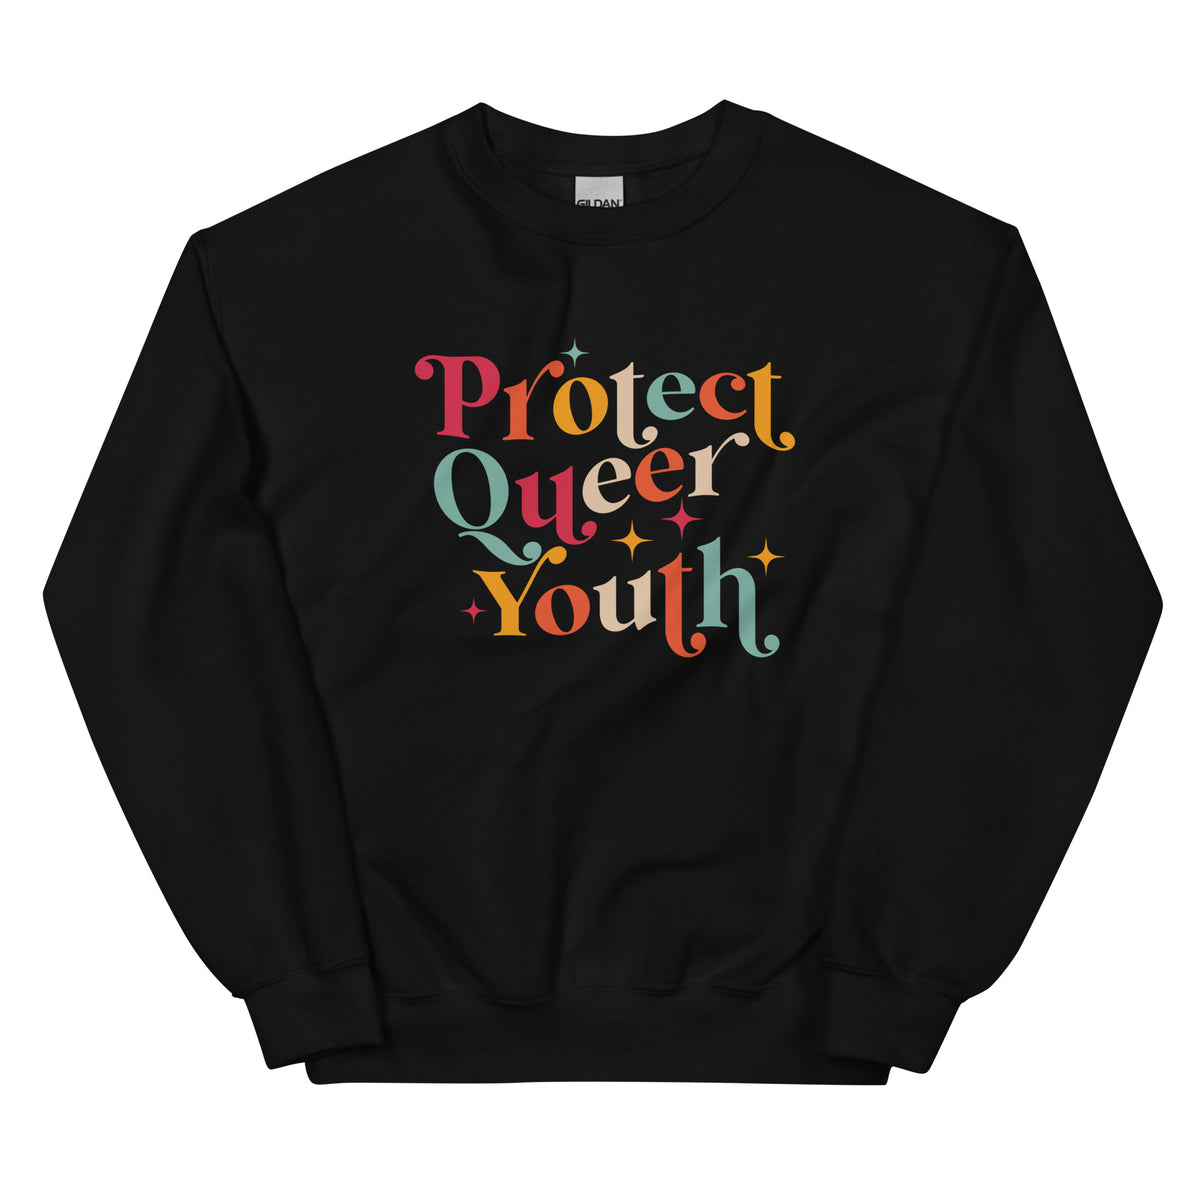 Protect Queer Youth Sweatshirt